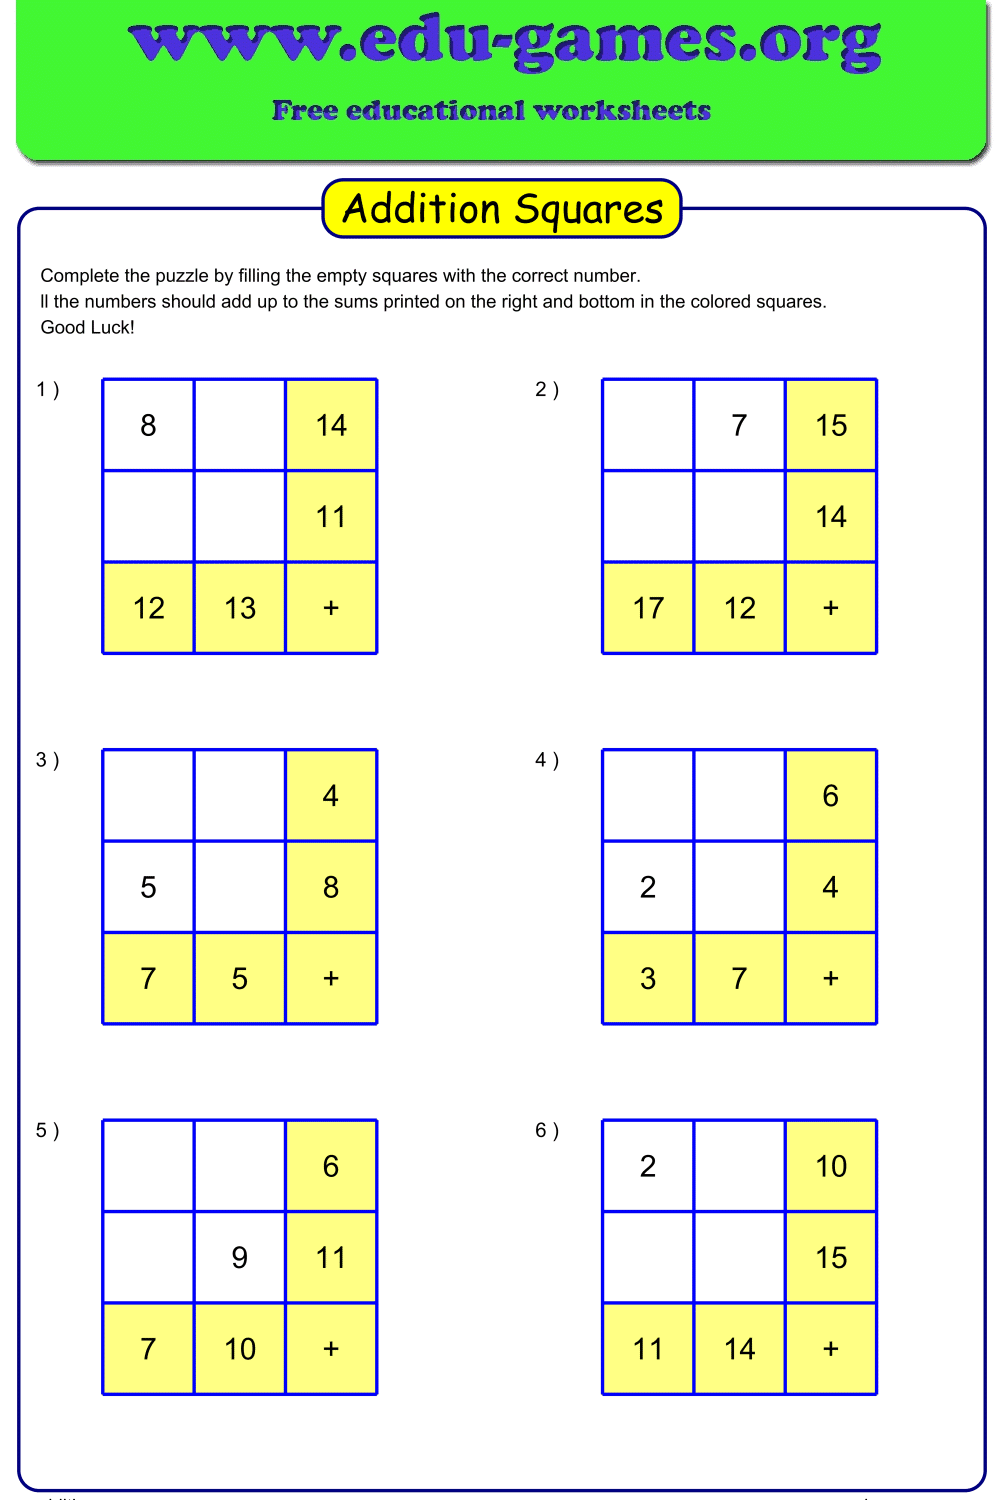 Addition squares png